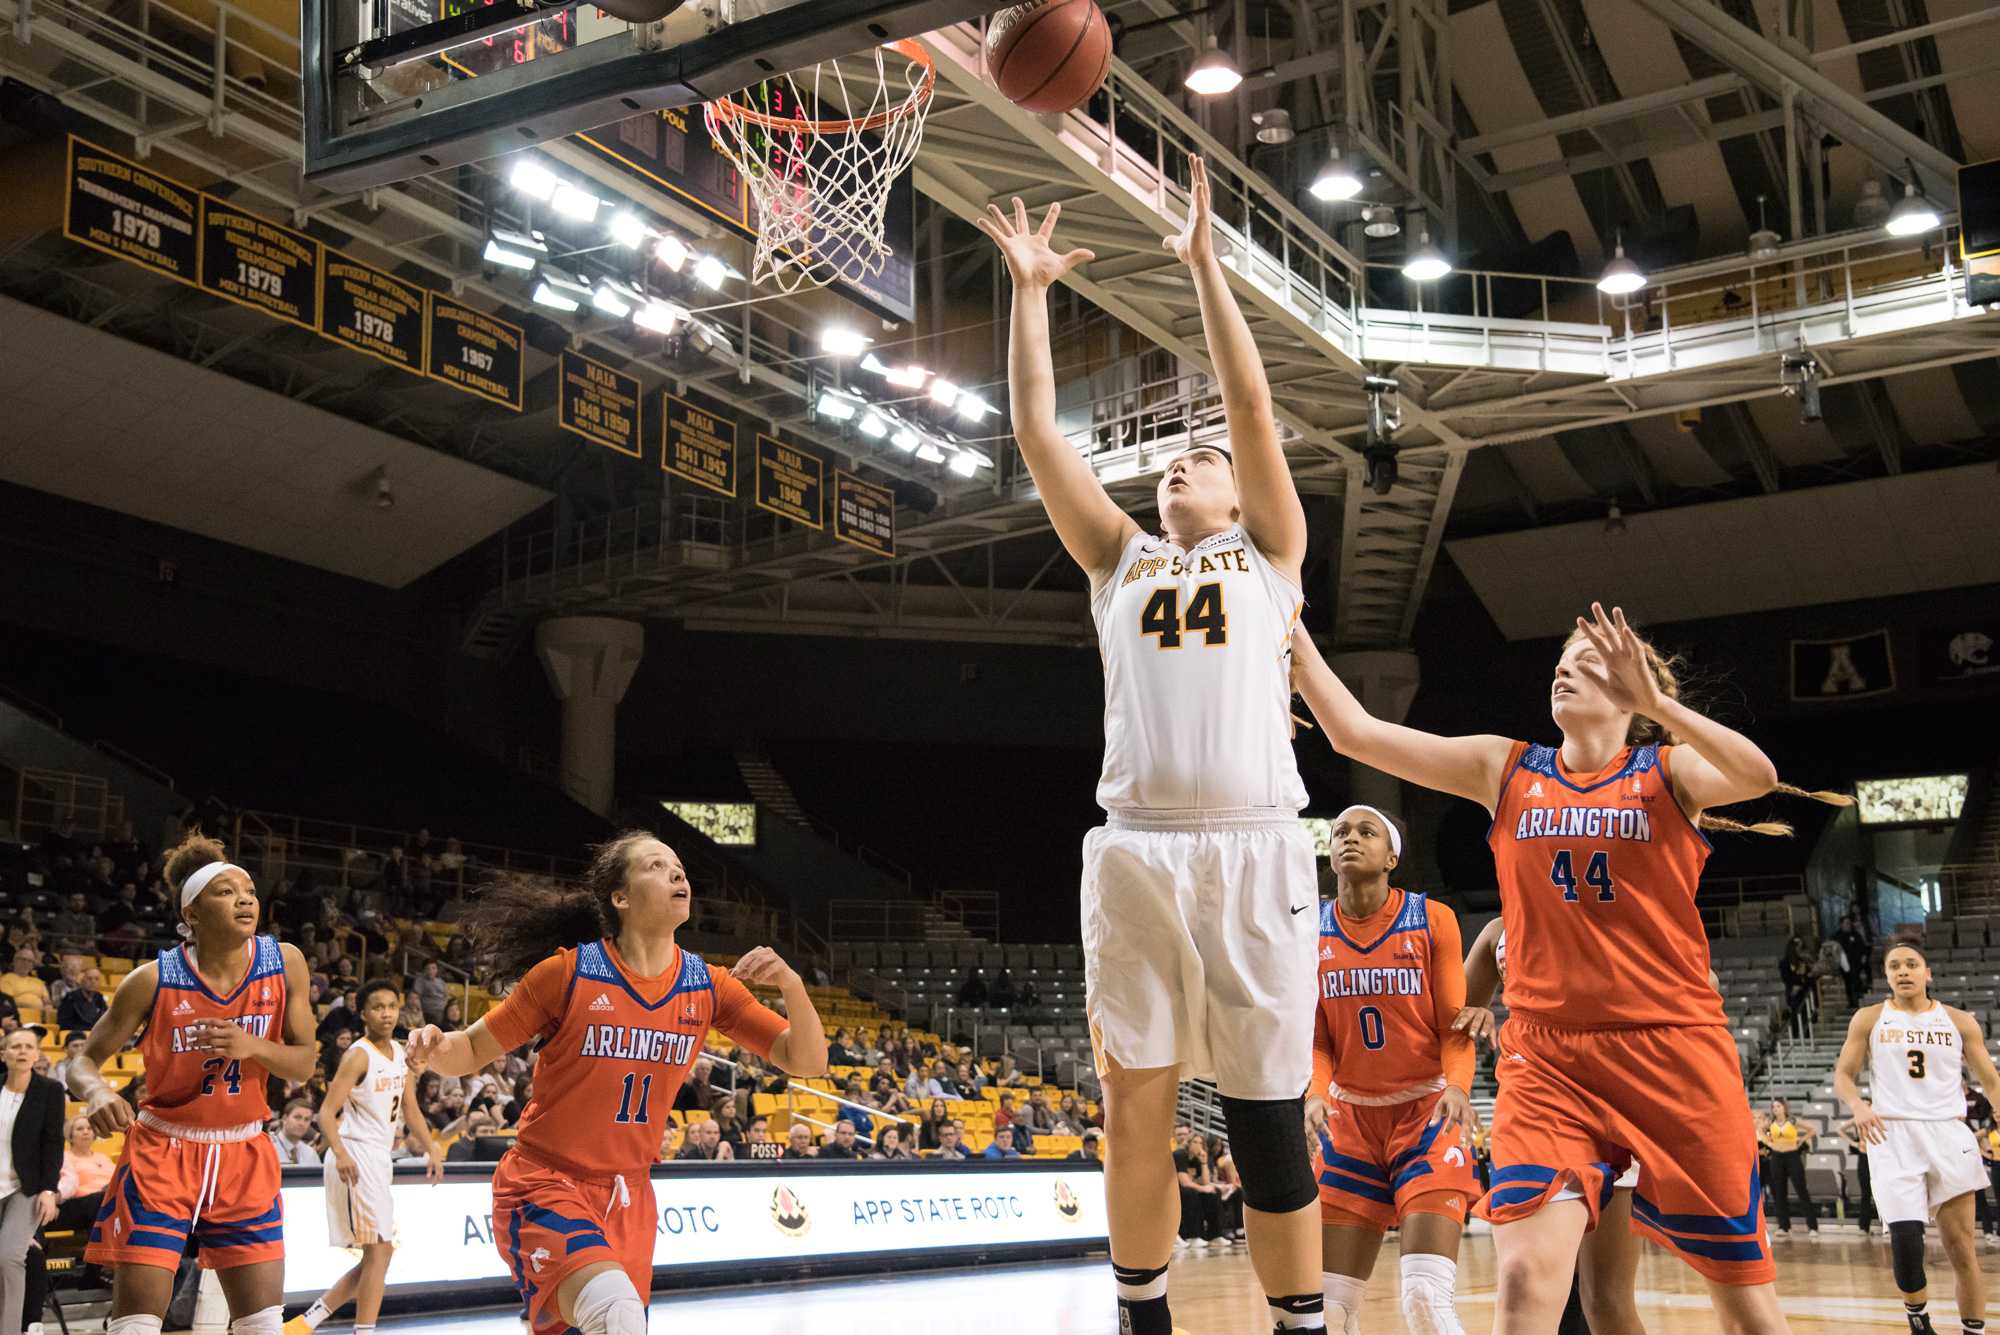 Freshman center Bayley Plummer, makes an attempt to score a basket during the game against UT Arlington. The Mountaineers lost the the Mavericks with the final score being 62-73.